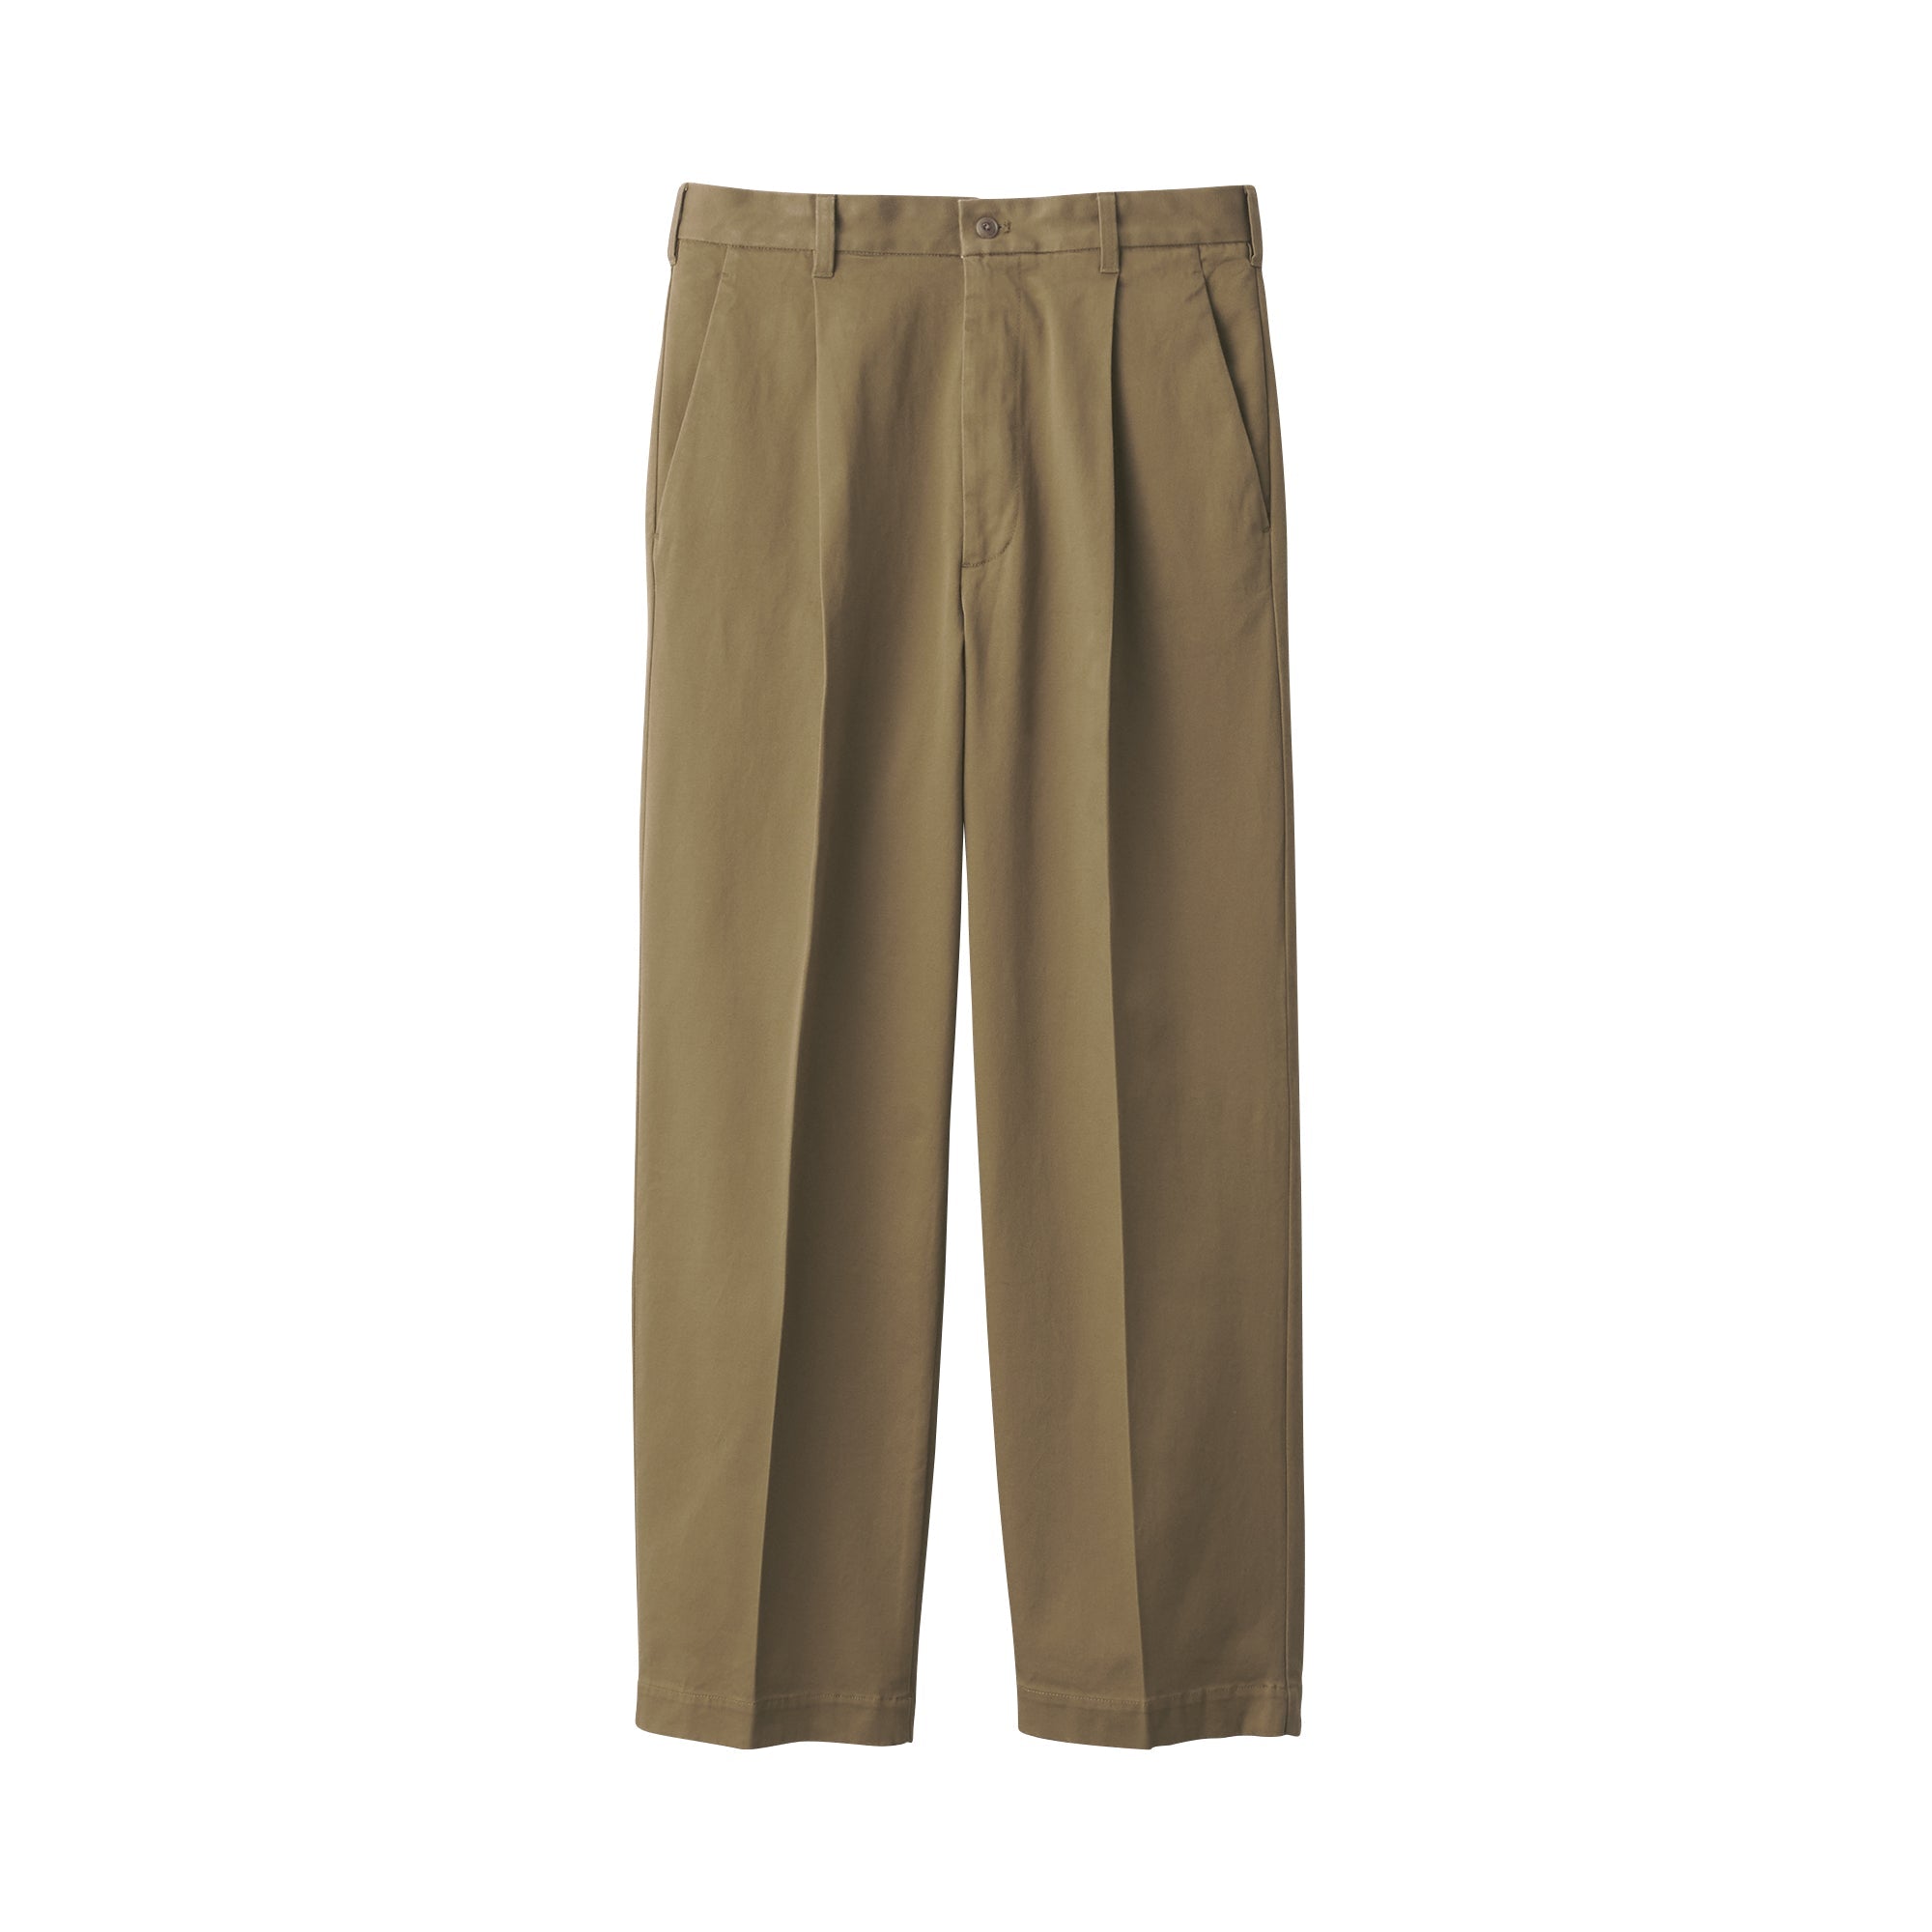 Men's Stretch Chino Tuck Wide Pants